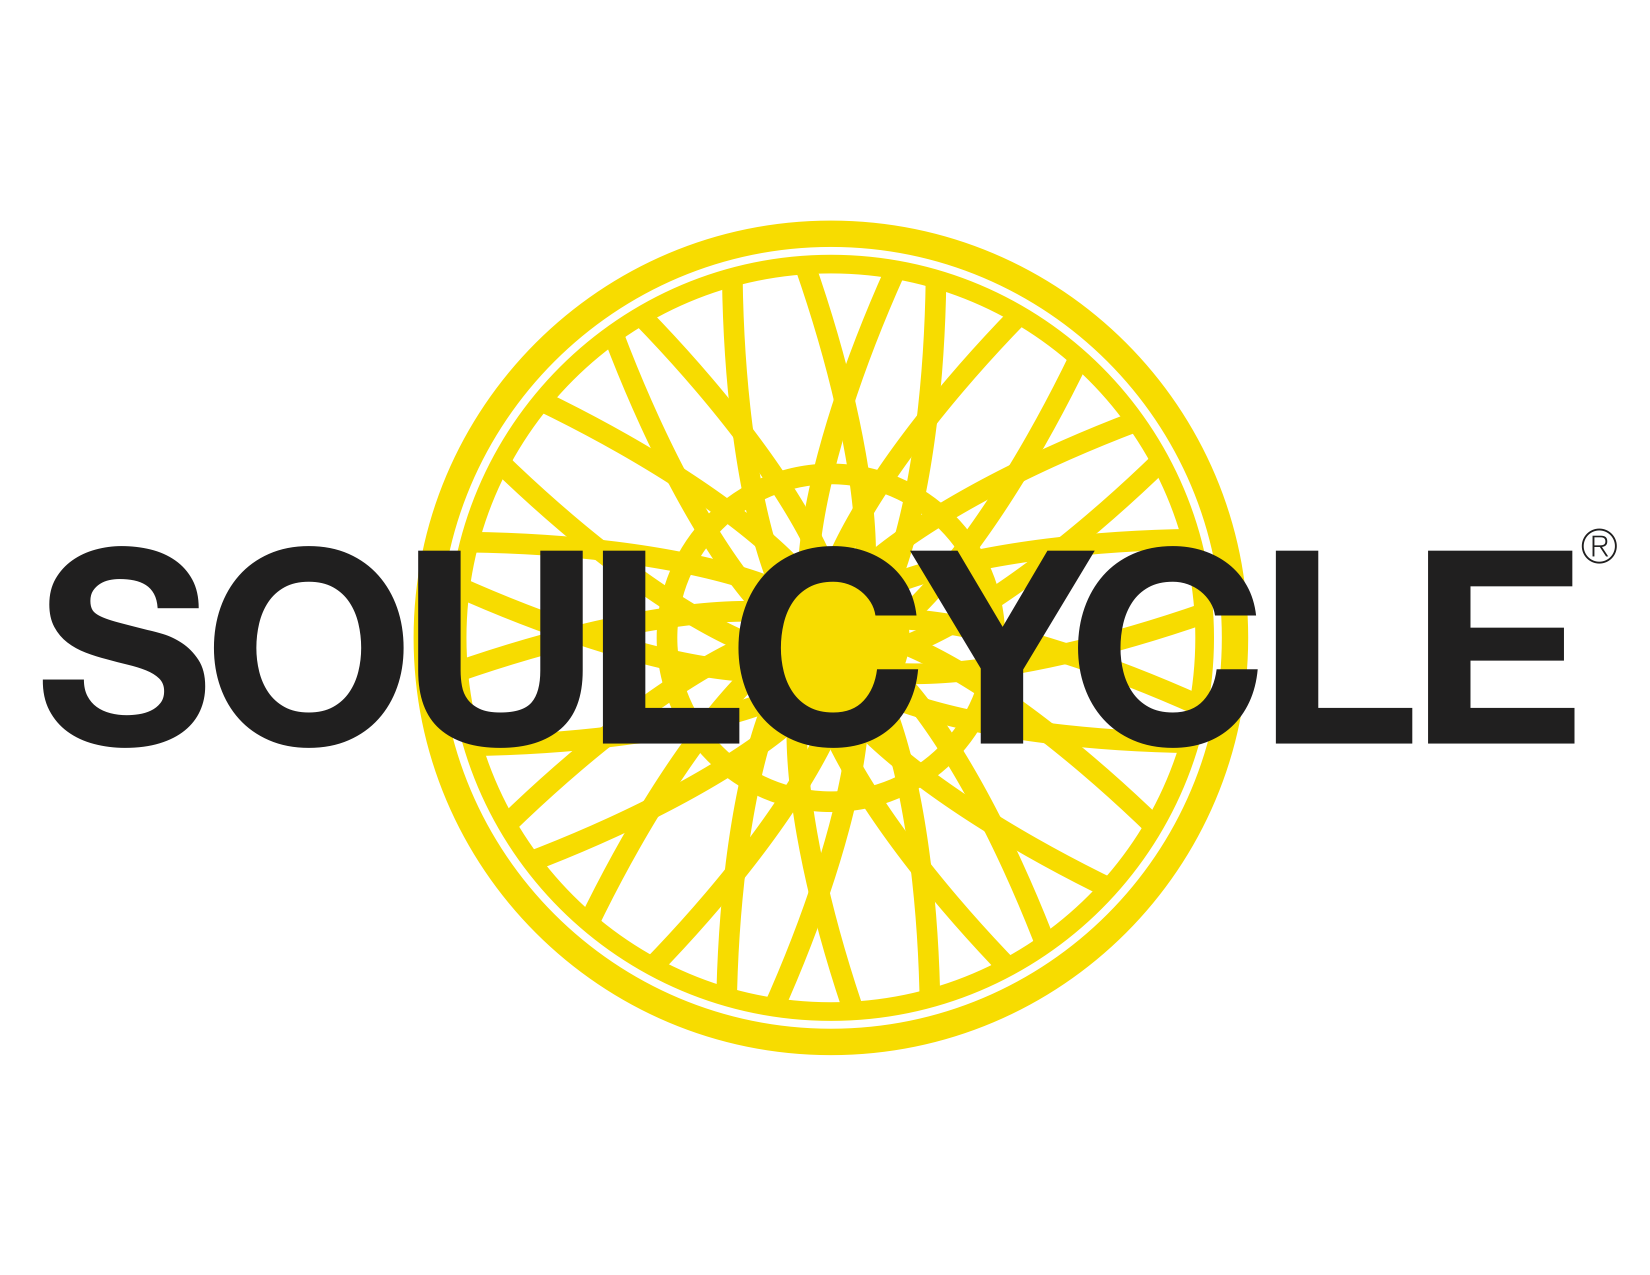 SOULCYCLE LOGO.png